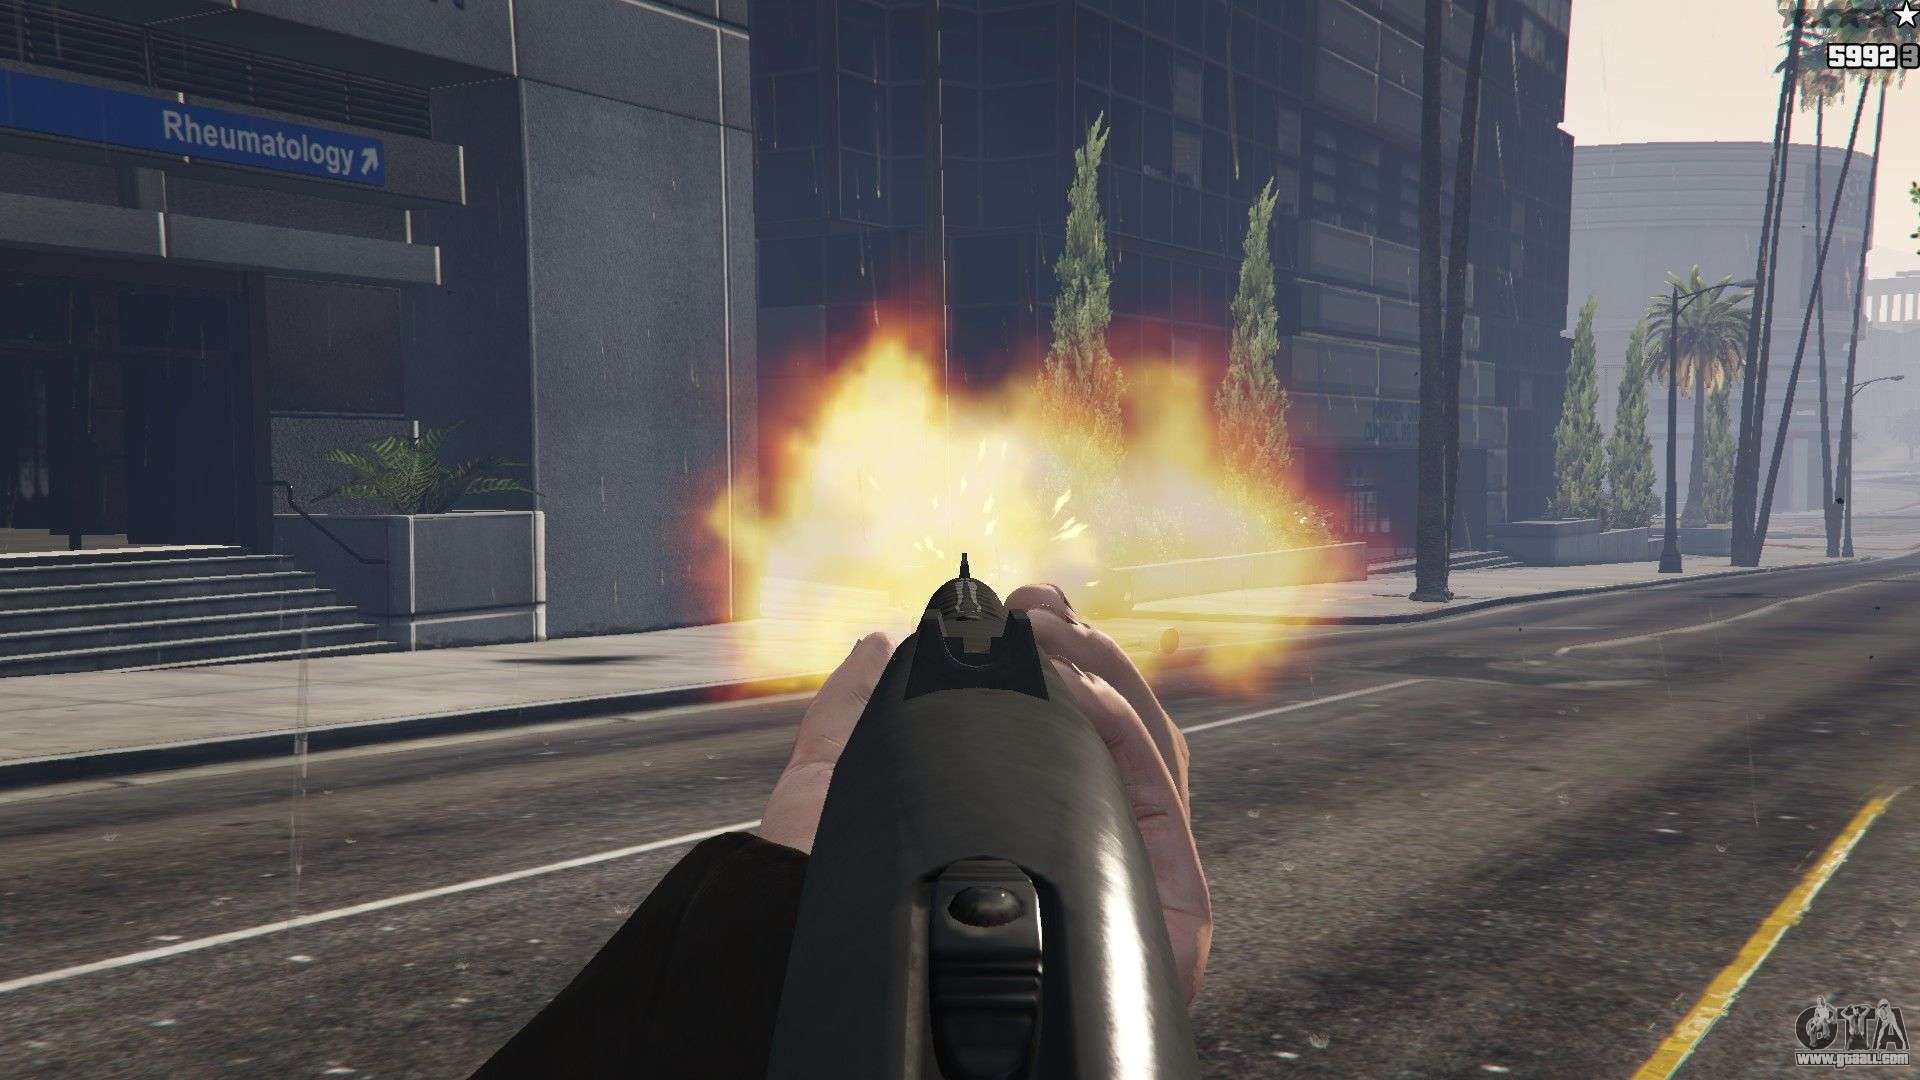 GTA V Mods Lets You Play on Low End PCs